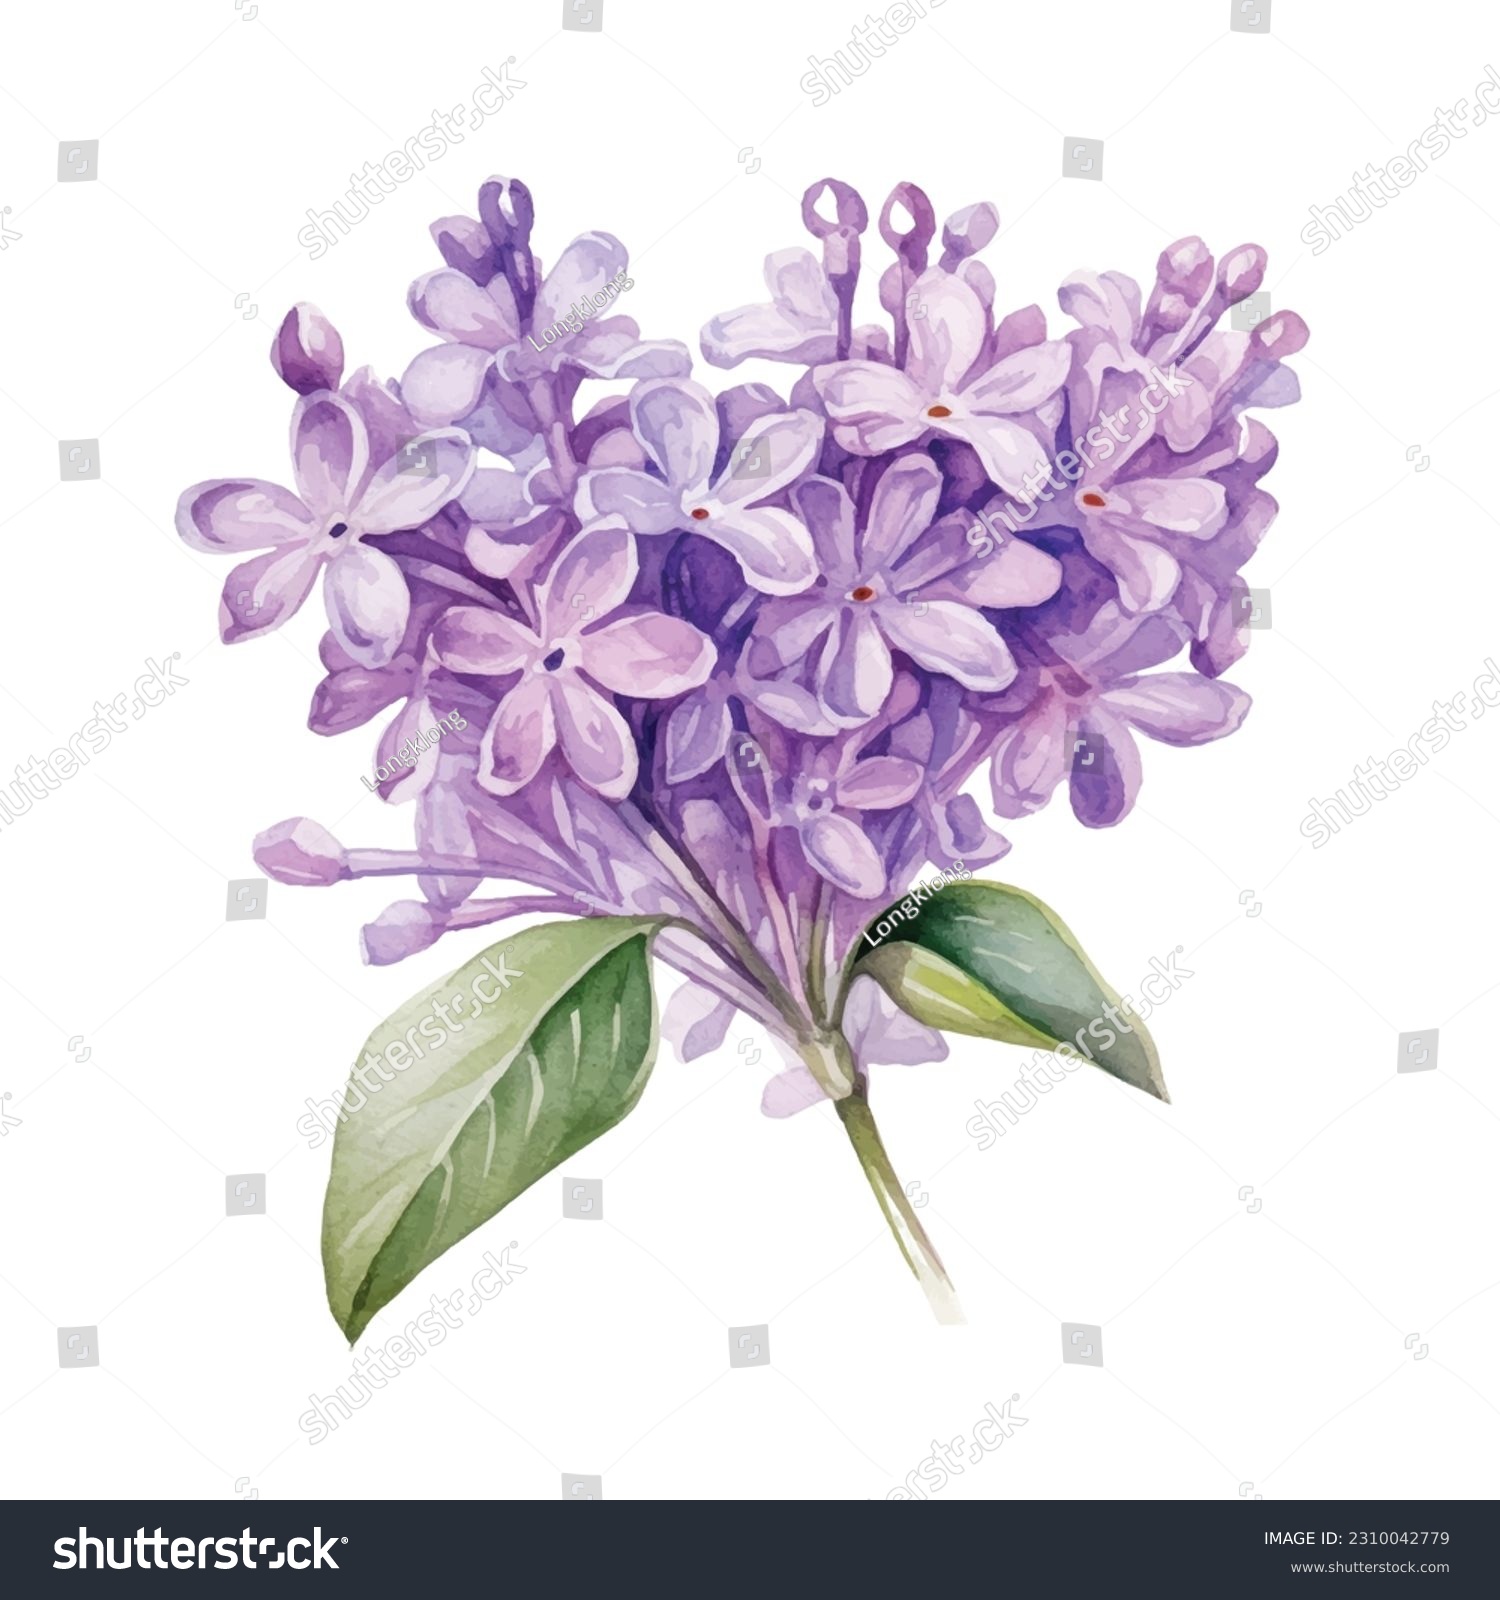 SVG of Vintage drawn illustration of Lilac free download shutterstock perfect for fabrics, t-shirts, mugs, decals, pillows, logo, pattern and much more svg